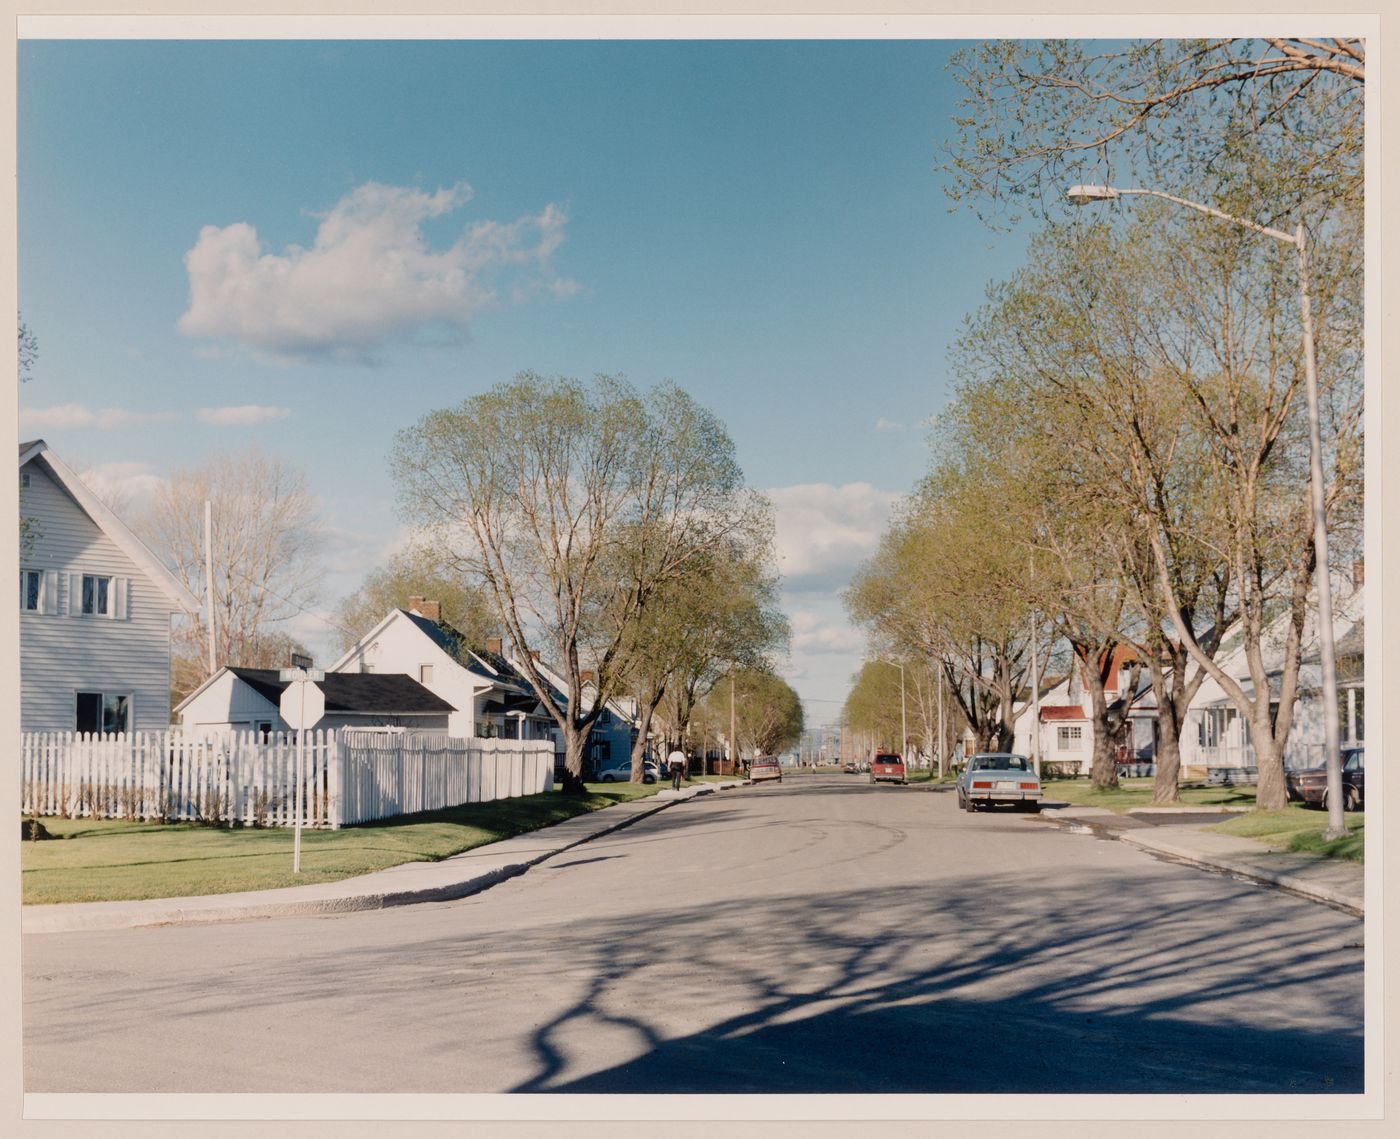 Section 2 of 2 of Panorama of workers' housing on Wohler and Davy streets looking northeast, north Arvida, Quebec